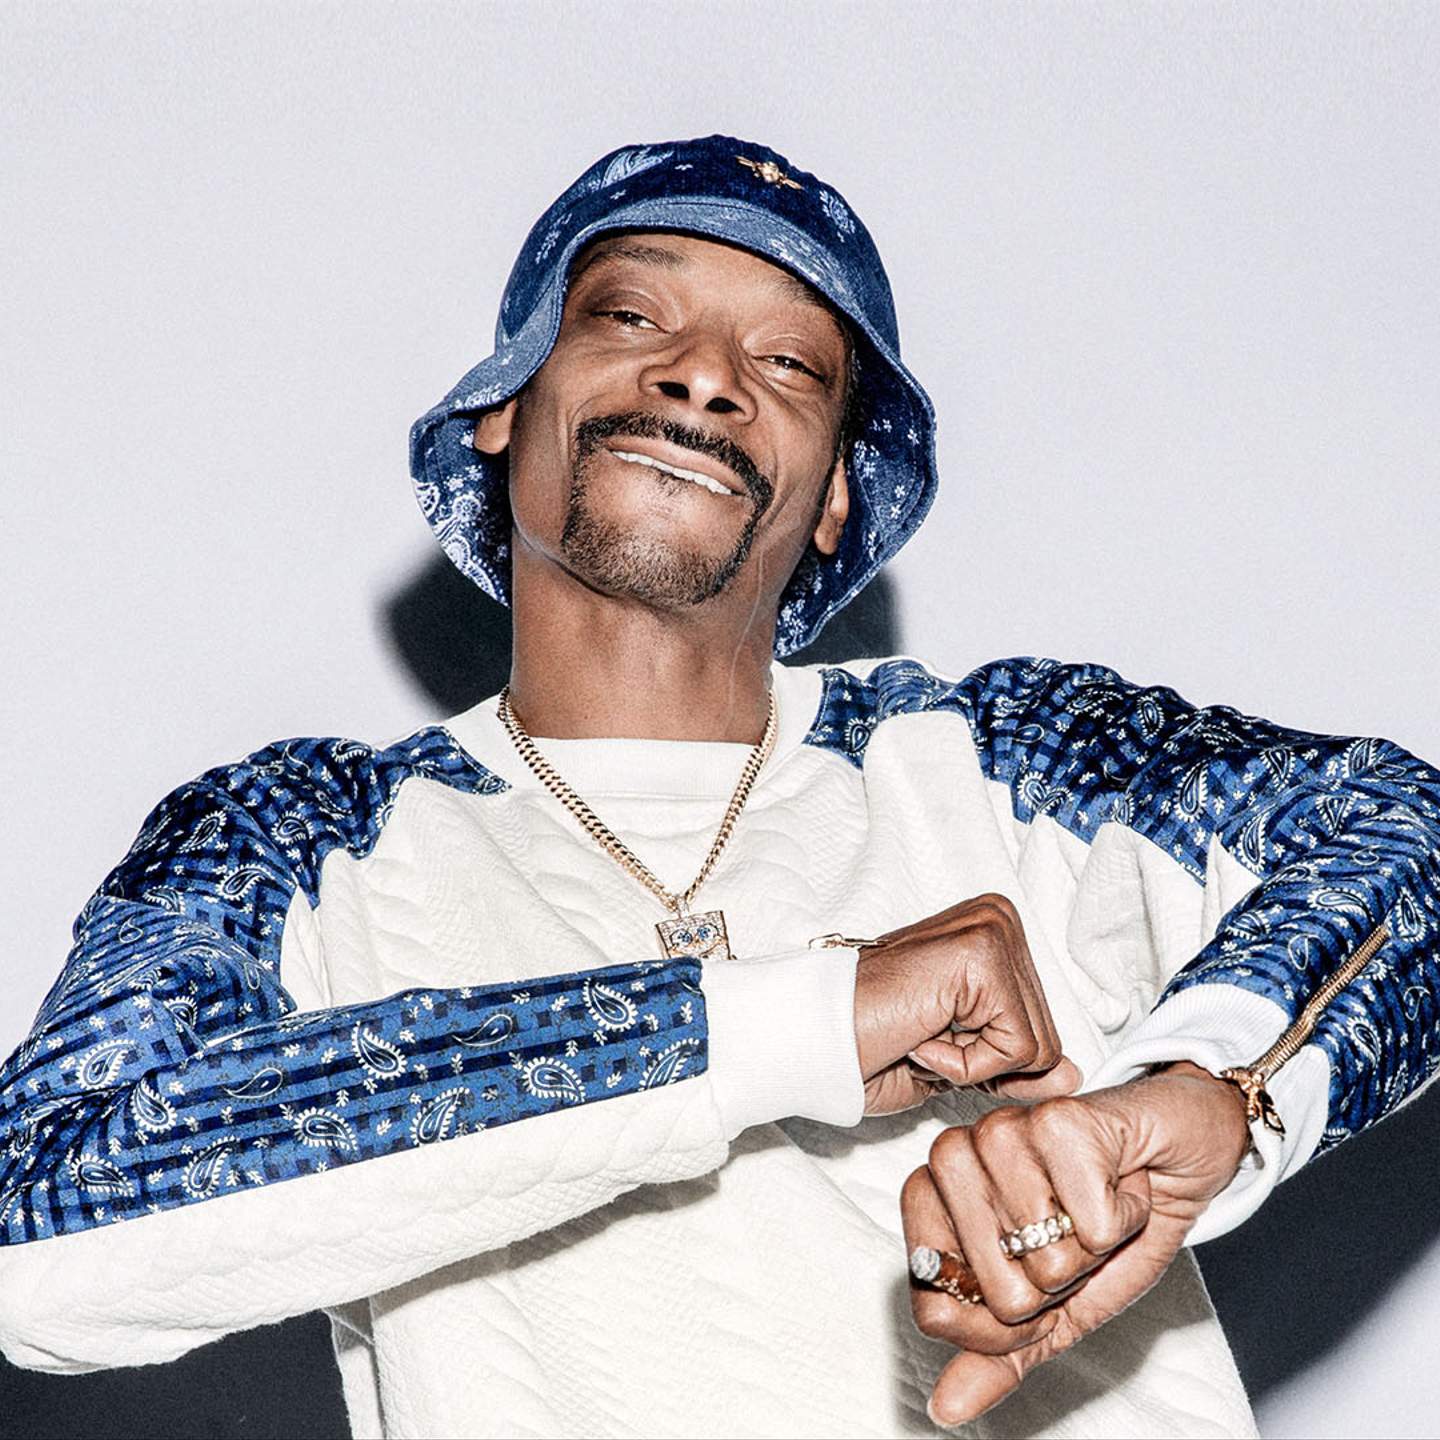 Break Out the Gin and Juice: Snoop Dogg Is Dropping His